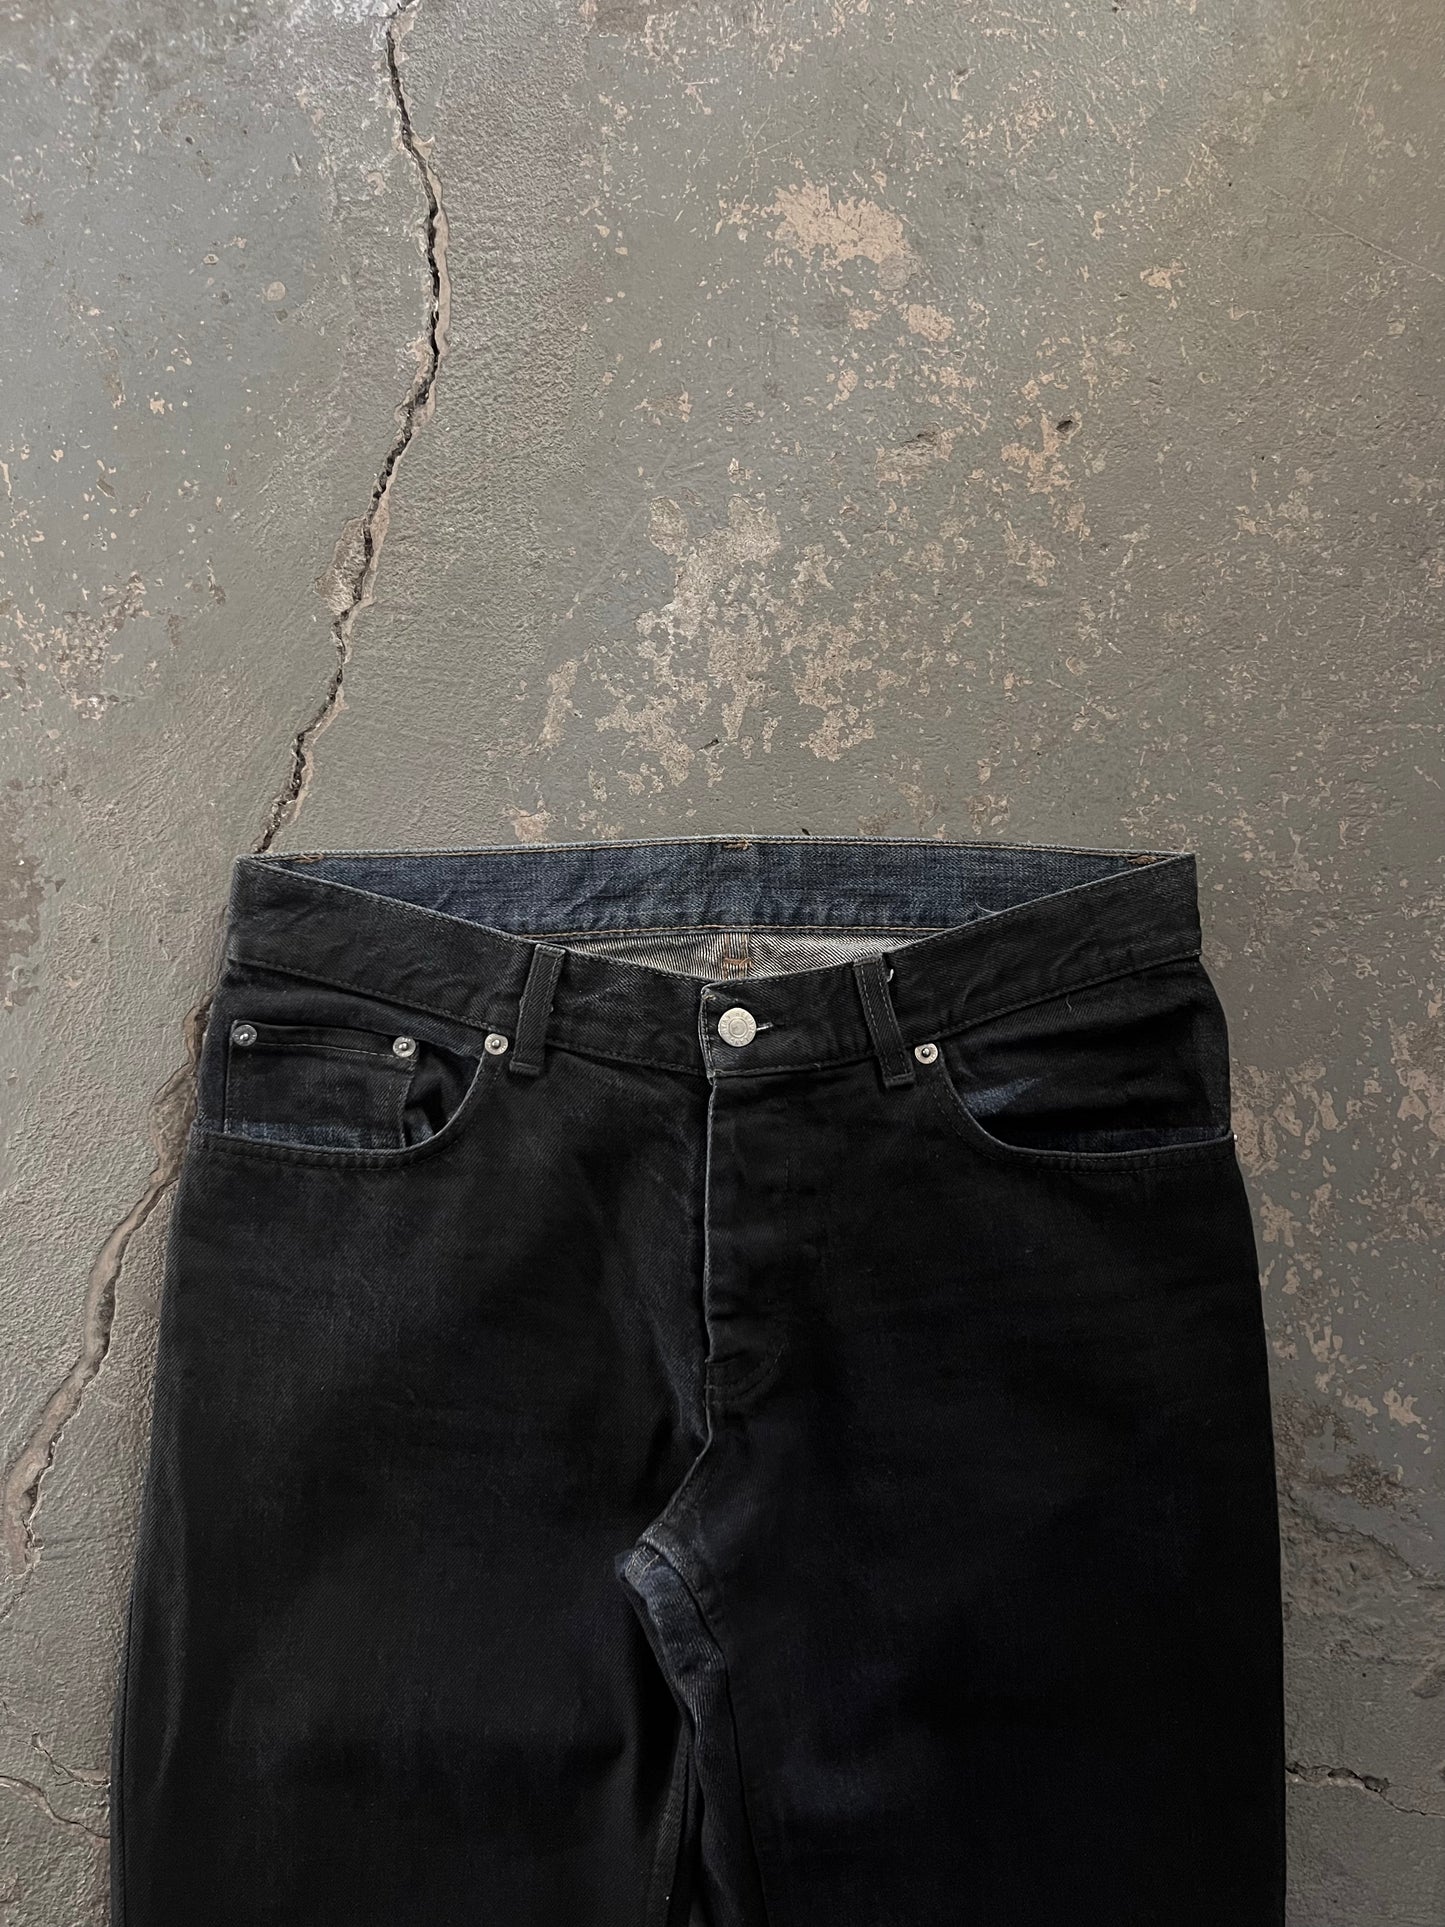 Helmut Lang SS03 Wax Coated Bootcut Jeans